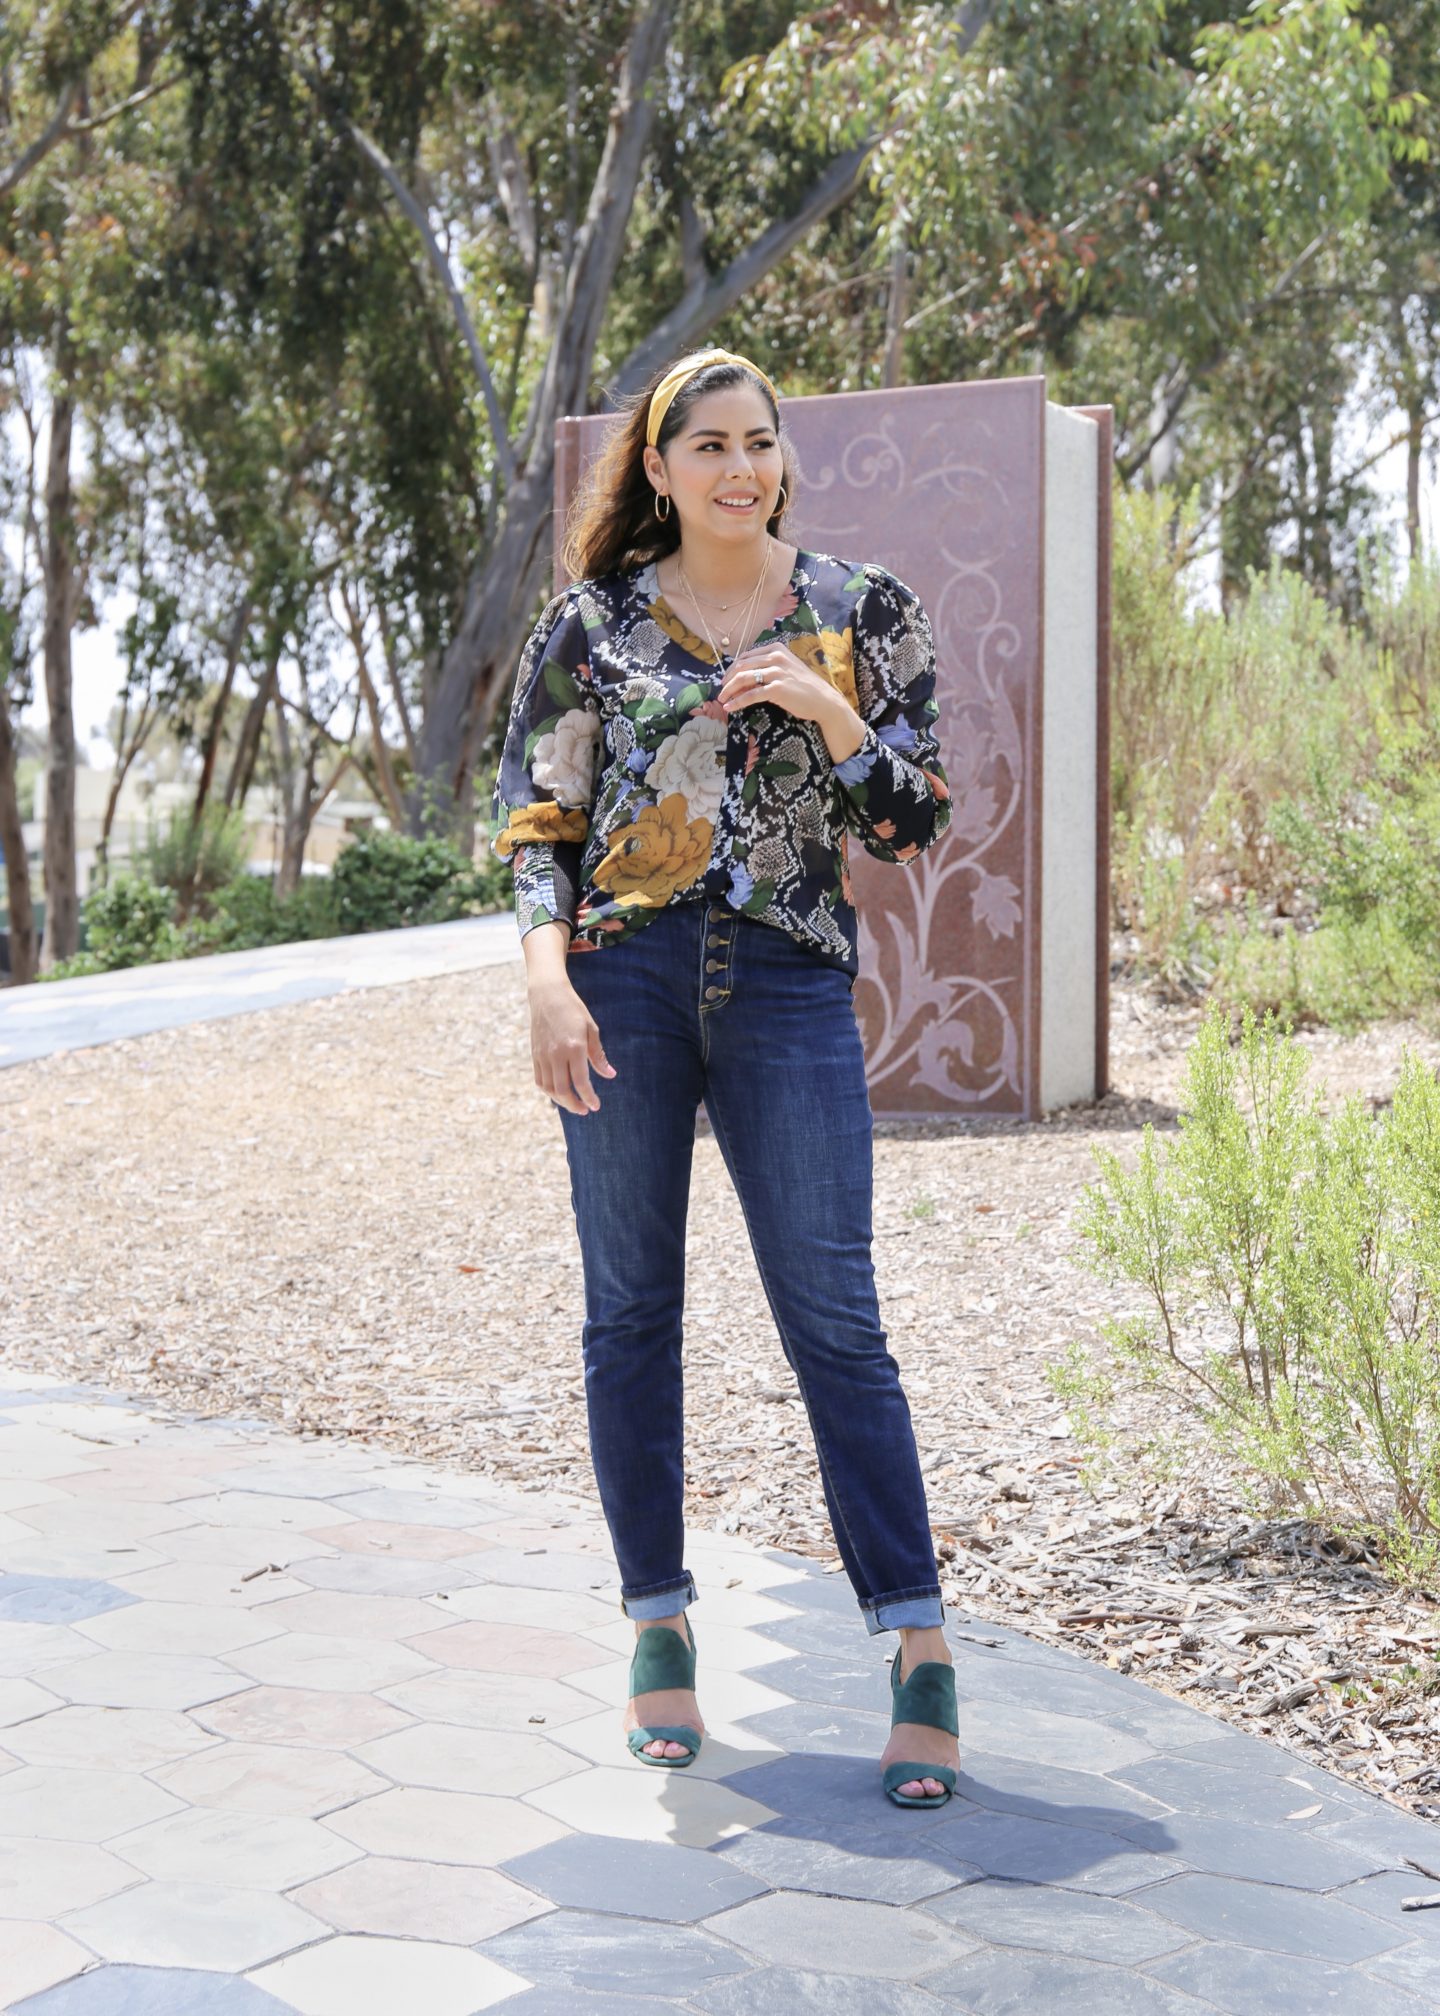 cabi Fall 2019 - How to wear snake print in Summer - Lil bits of Chic